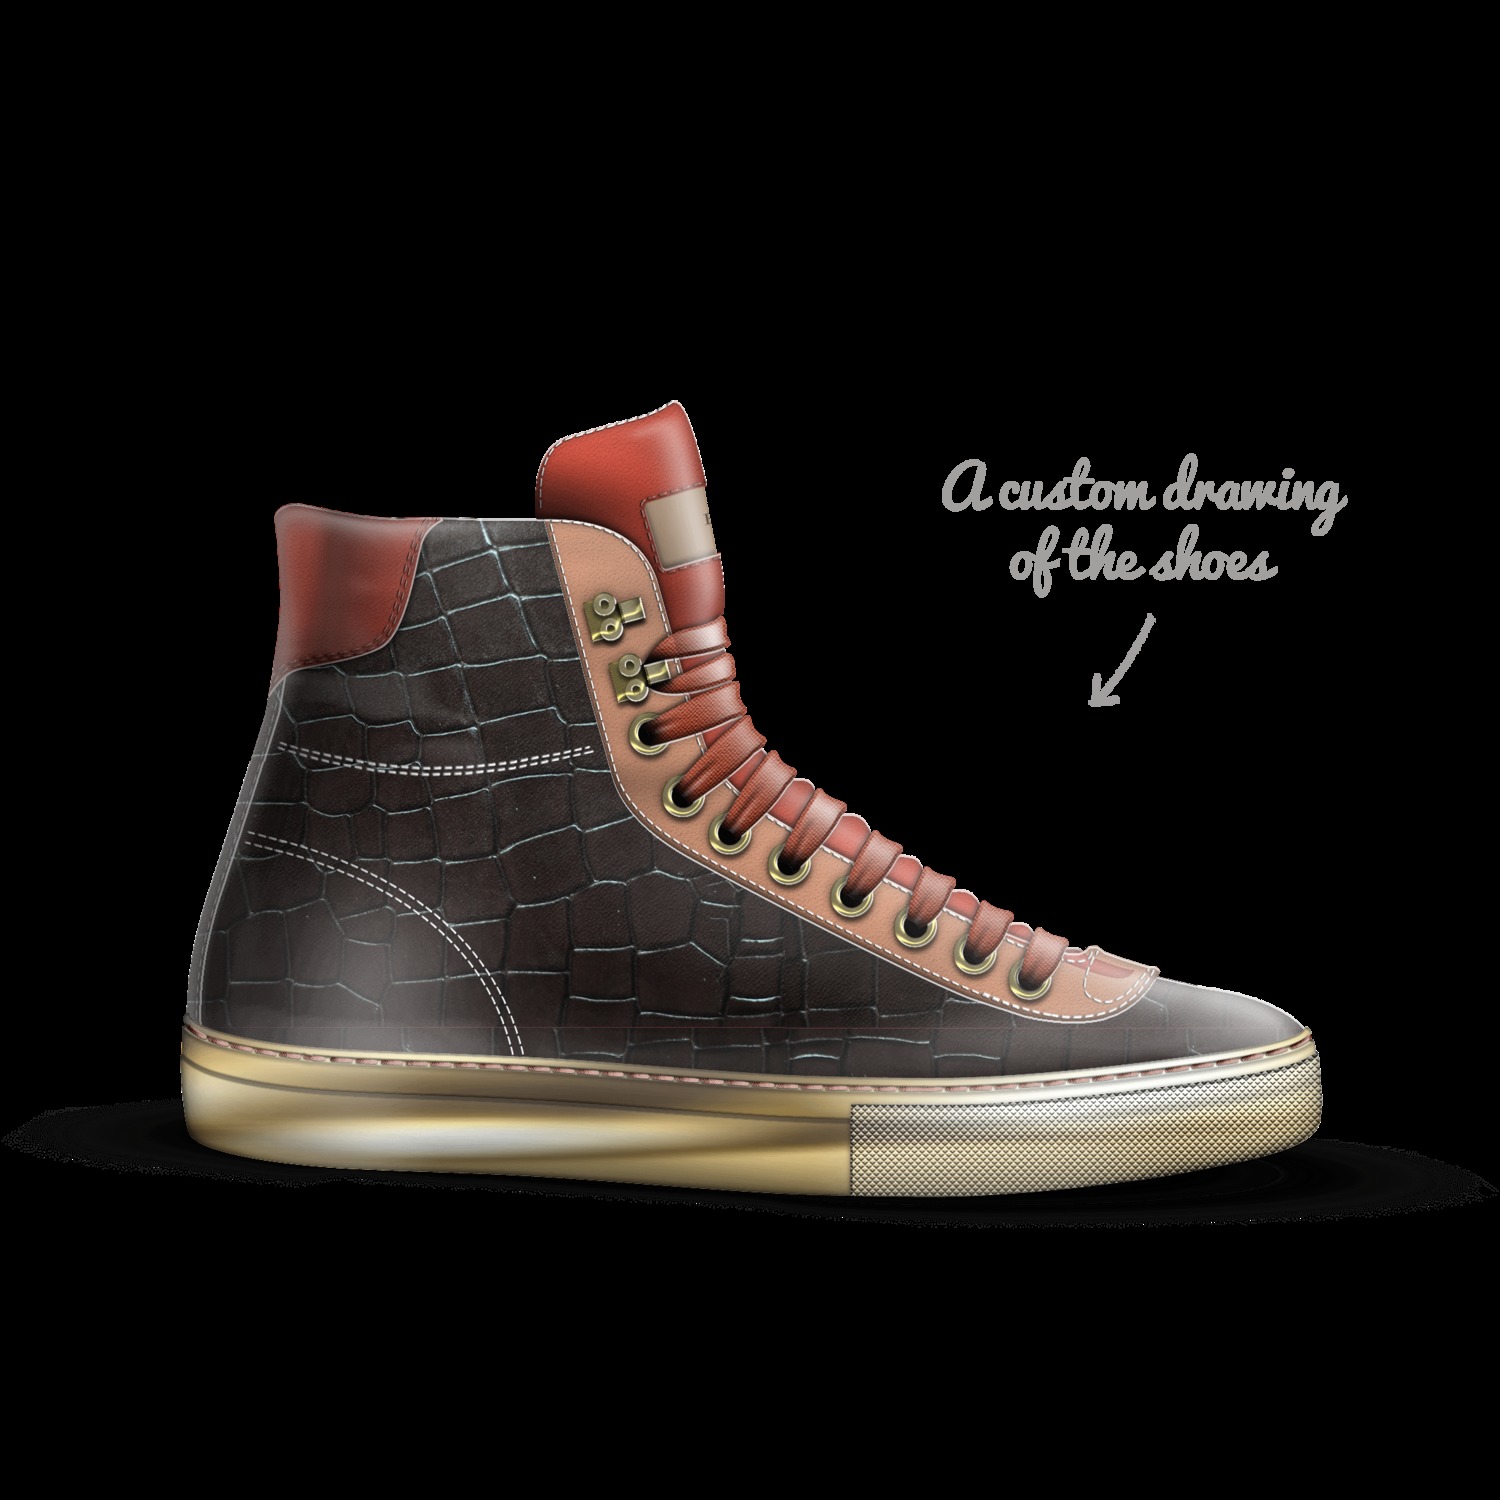 A Custom Shoe concept by Edward Manning